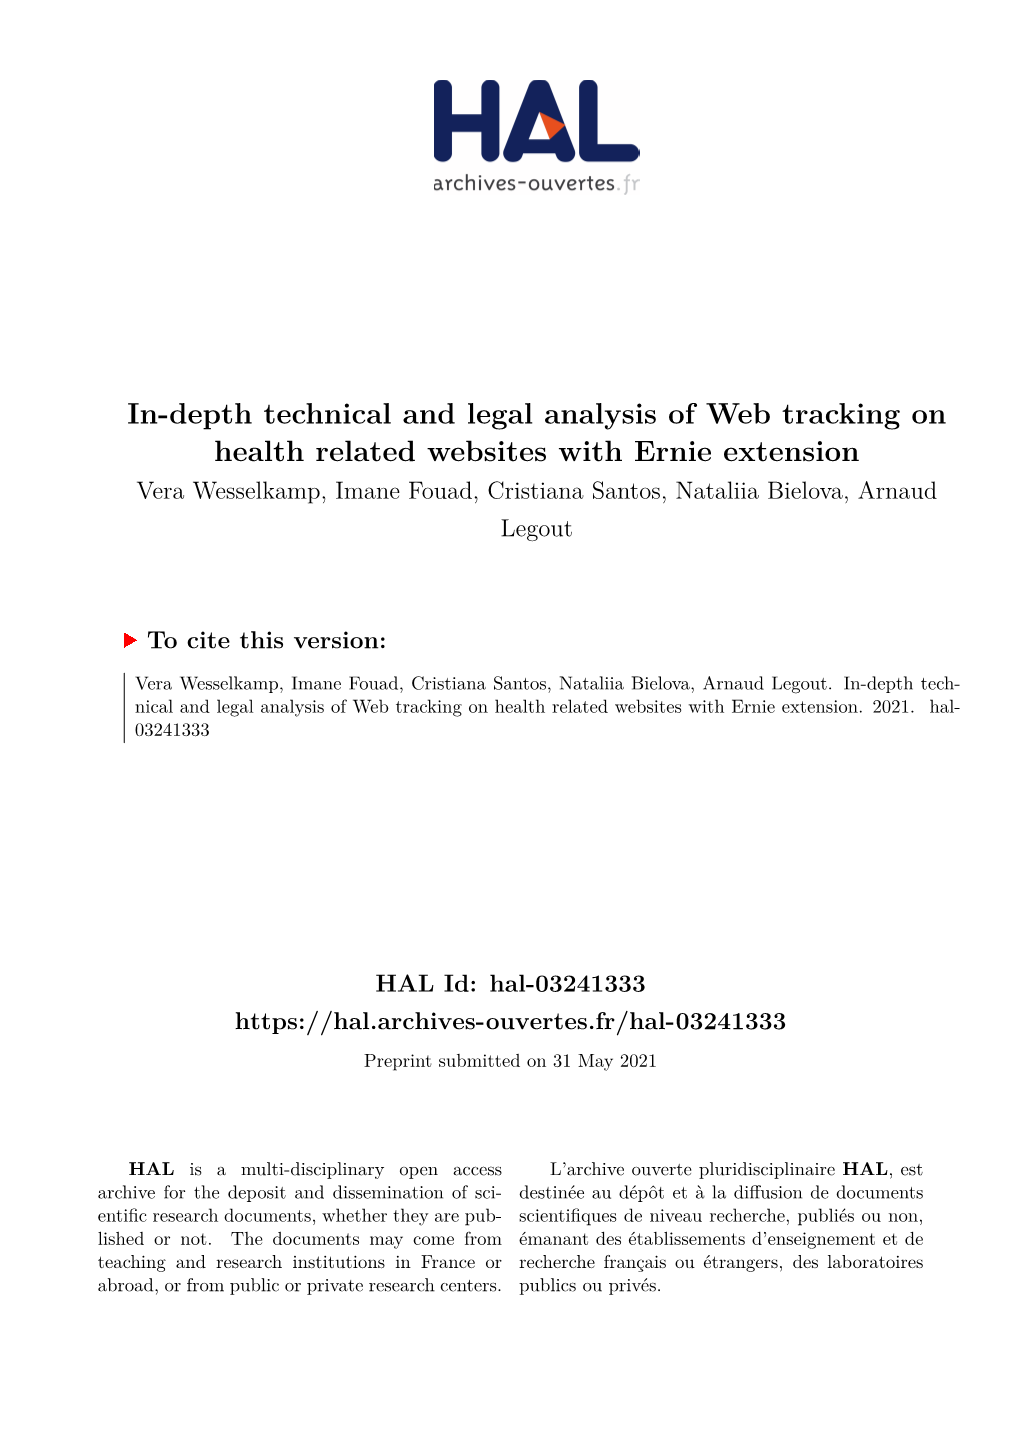 In-Depth Technical and Legal Analysis of Web Tracking on Health Related